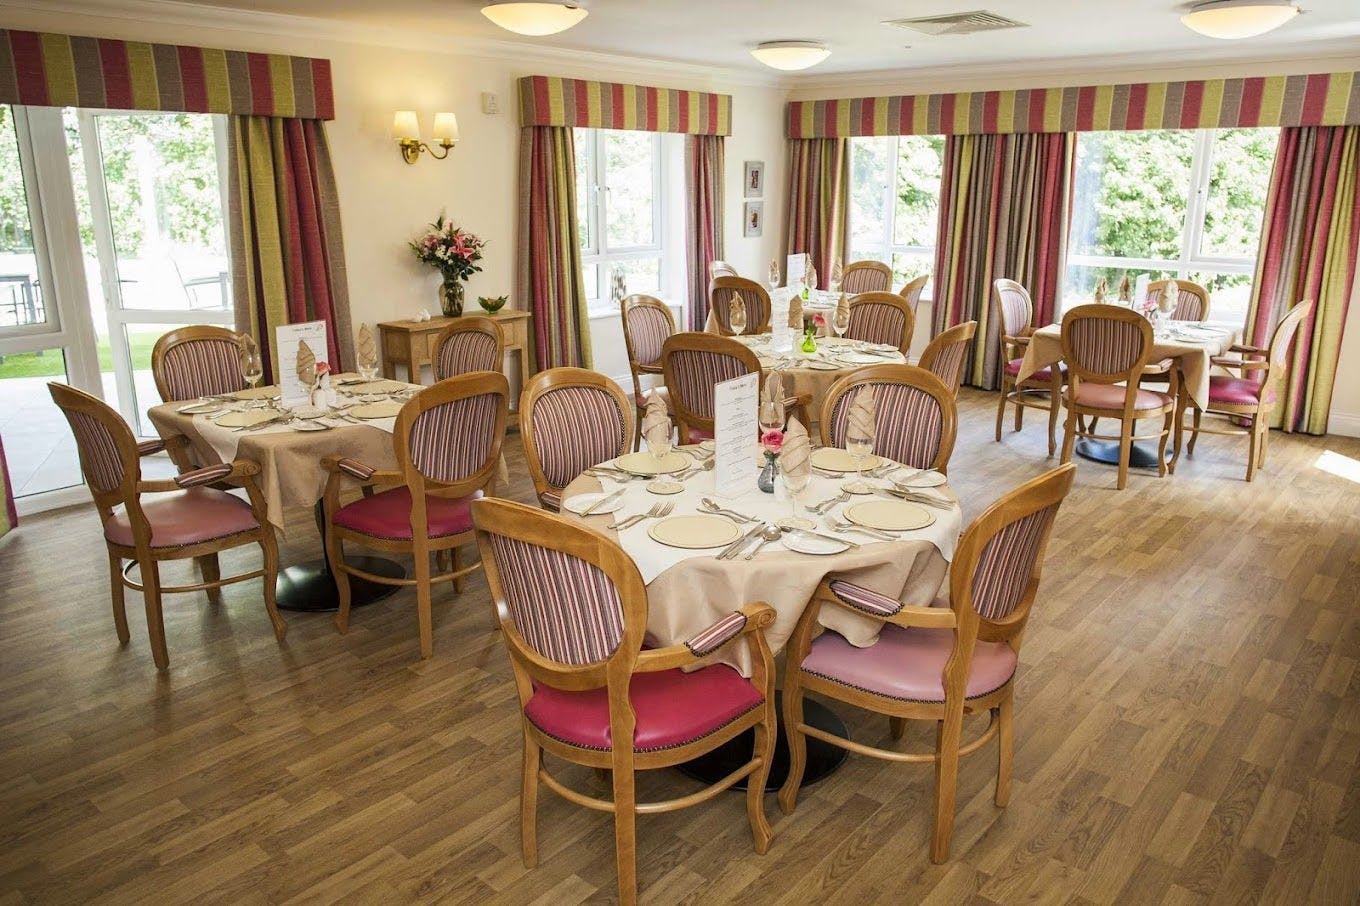 Dining Room at Sutton Grange Care Home in Southport, Merseyside